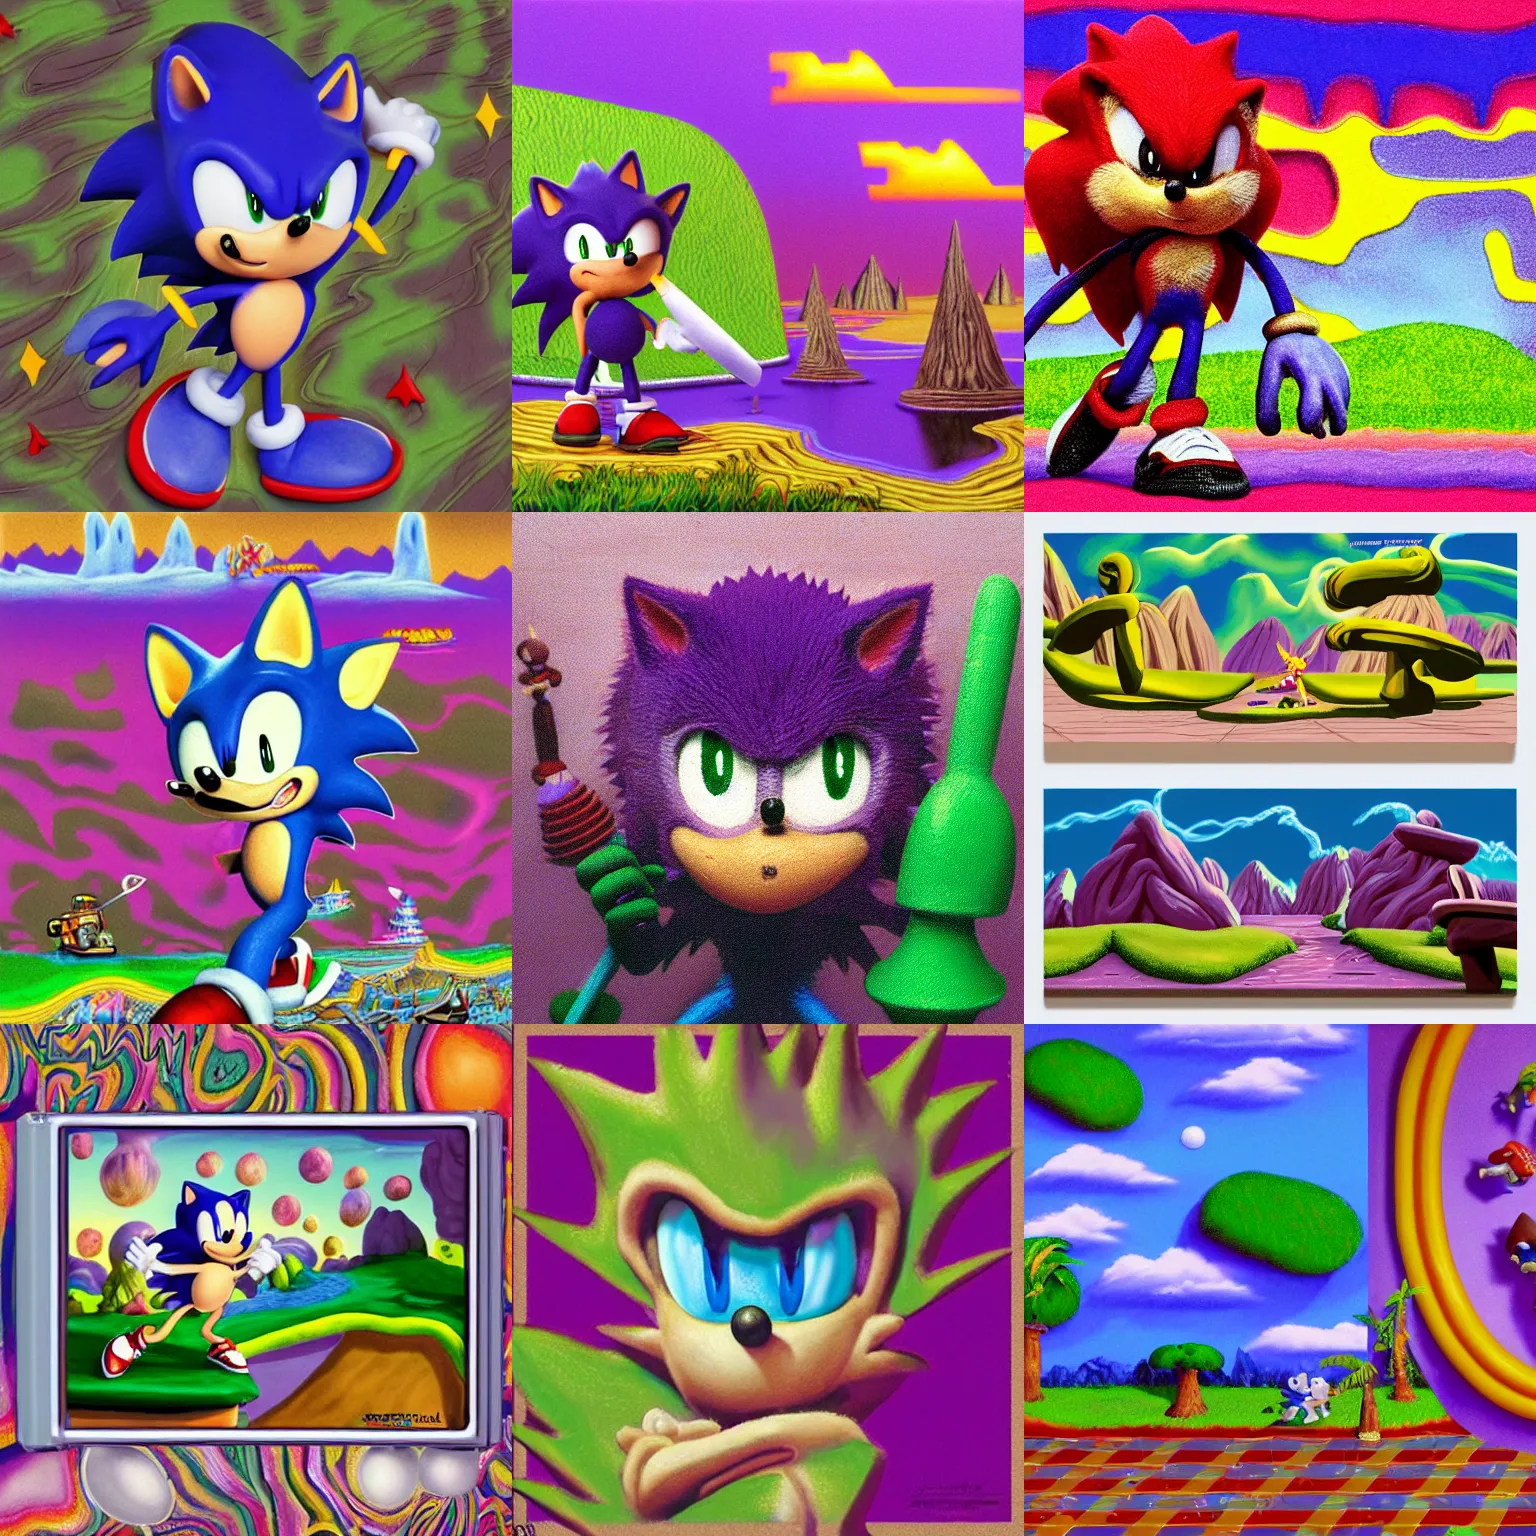 Prompt: clay stop motion claymation portrait of sonic hedgehog and a matte painting landscape of a surreal sharp, foggy detailed professional soft pastels high quality airbrush art album cover of a liquid dissolving airbrush art lsd dmt sonic the hedgehog swimming through cyberspace purple checkerboard background 1 9 9 0 s 1 9 9 2 sega genesis rareware video game album cover